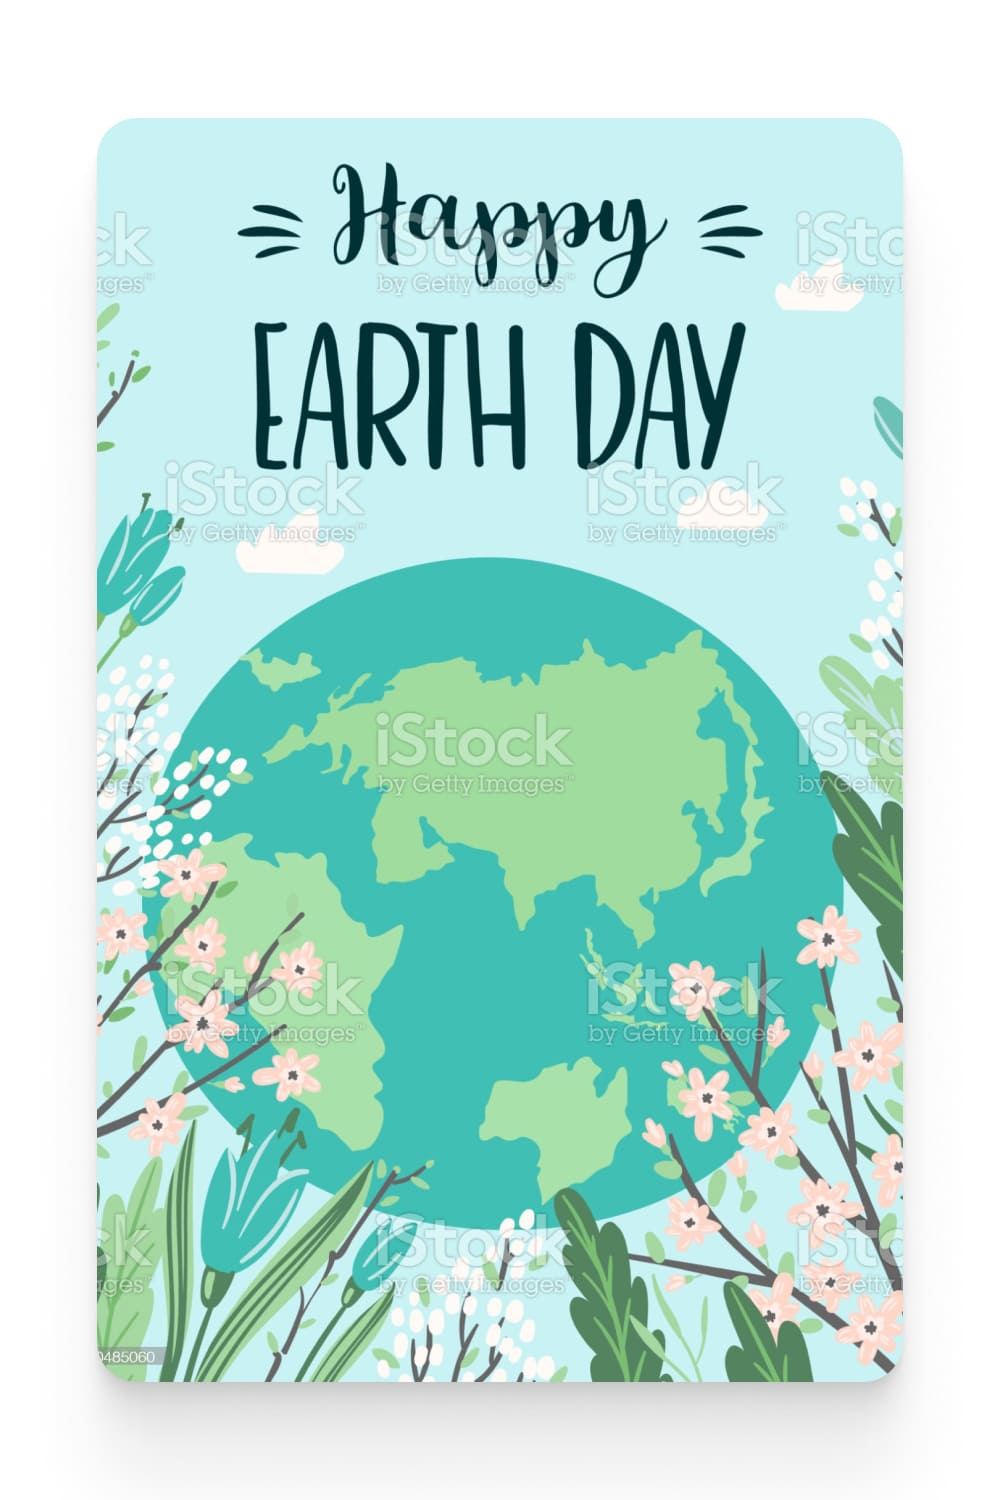 Earth Day banner with drawn earth and flowers.